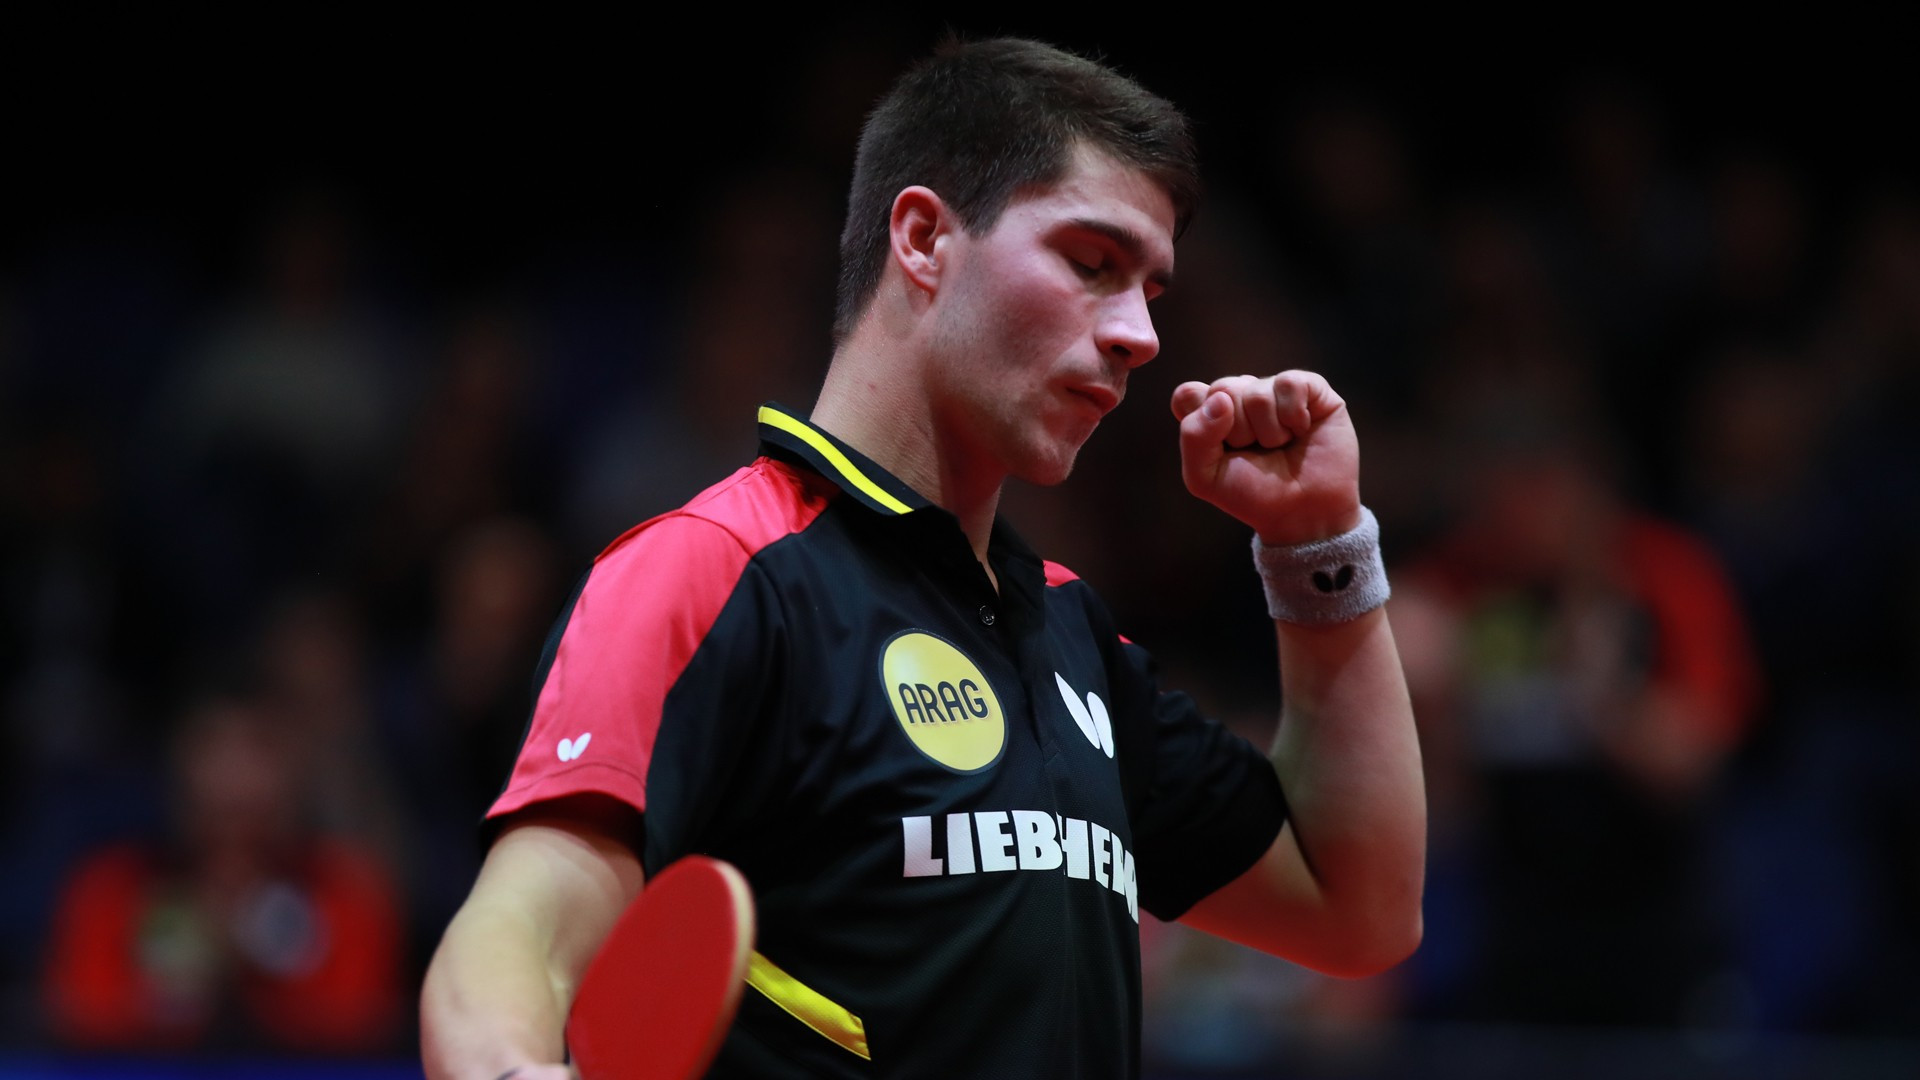 Germany and Romania victorious in ITTF European Team Championships finals